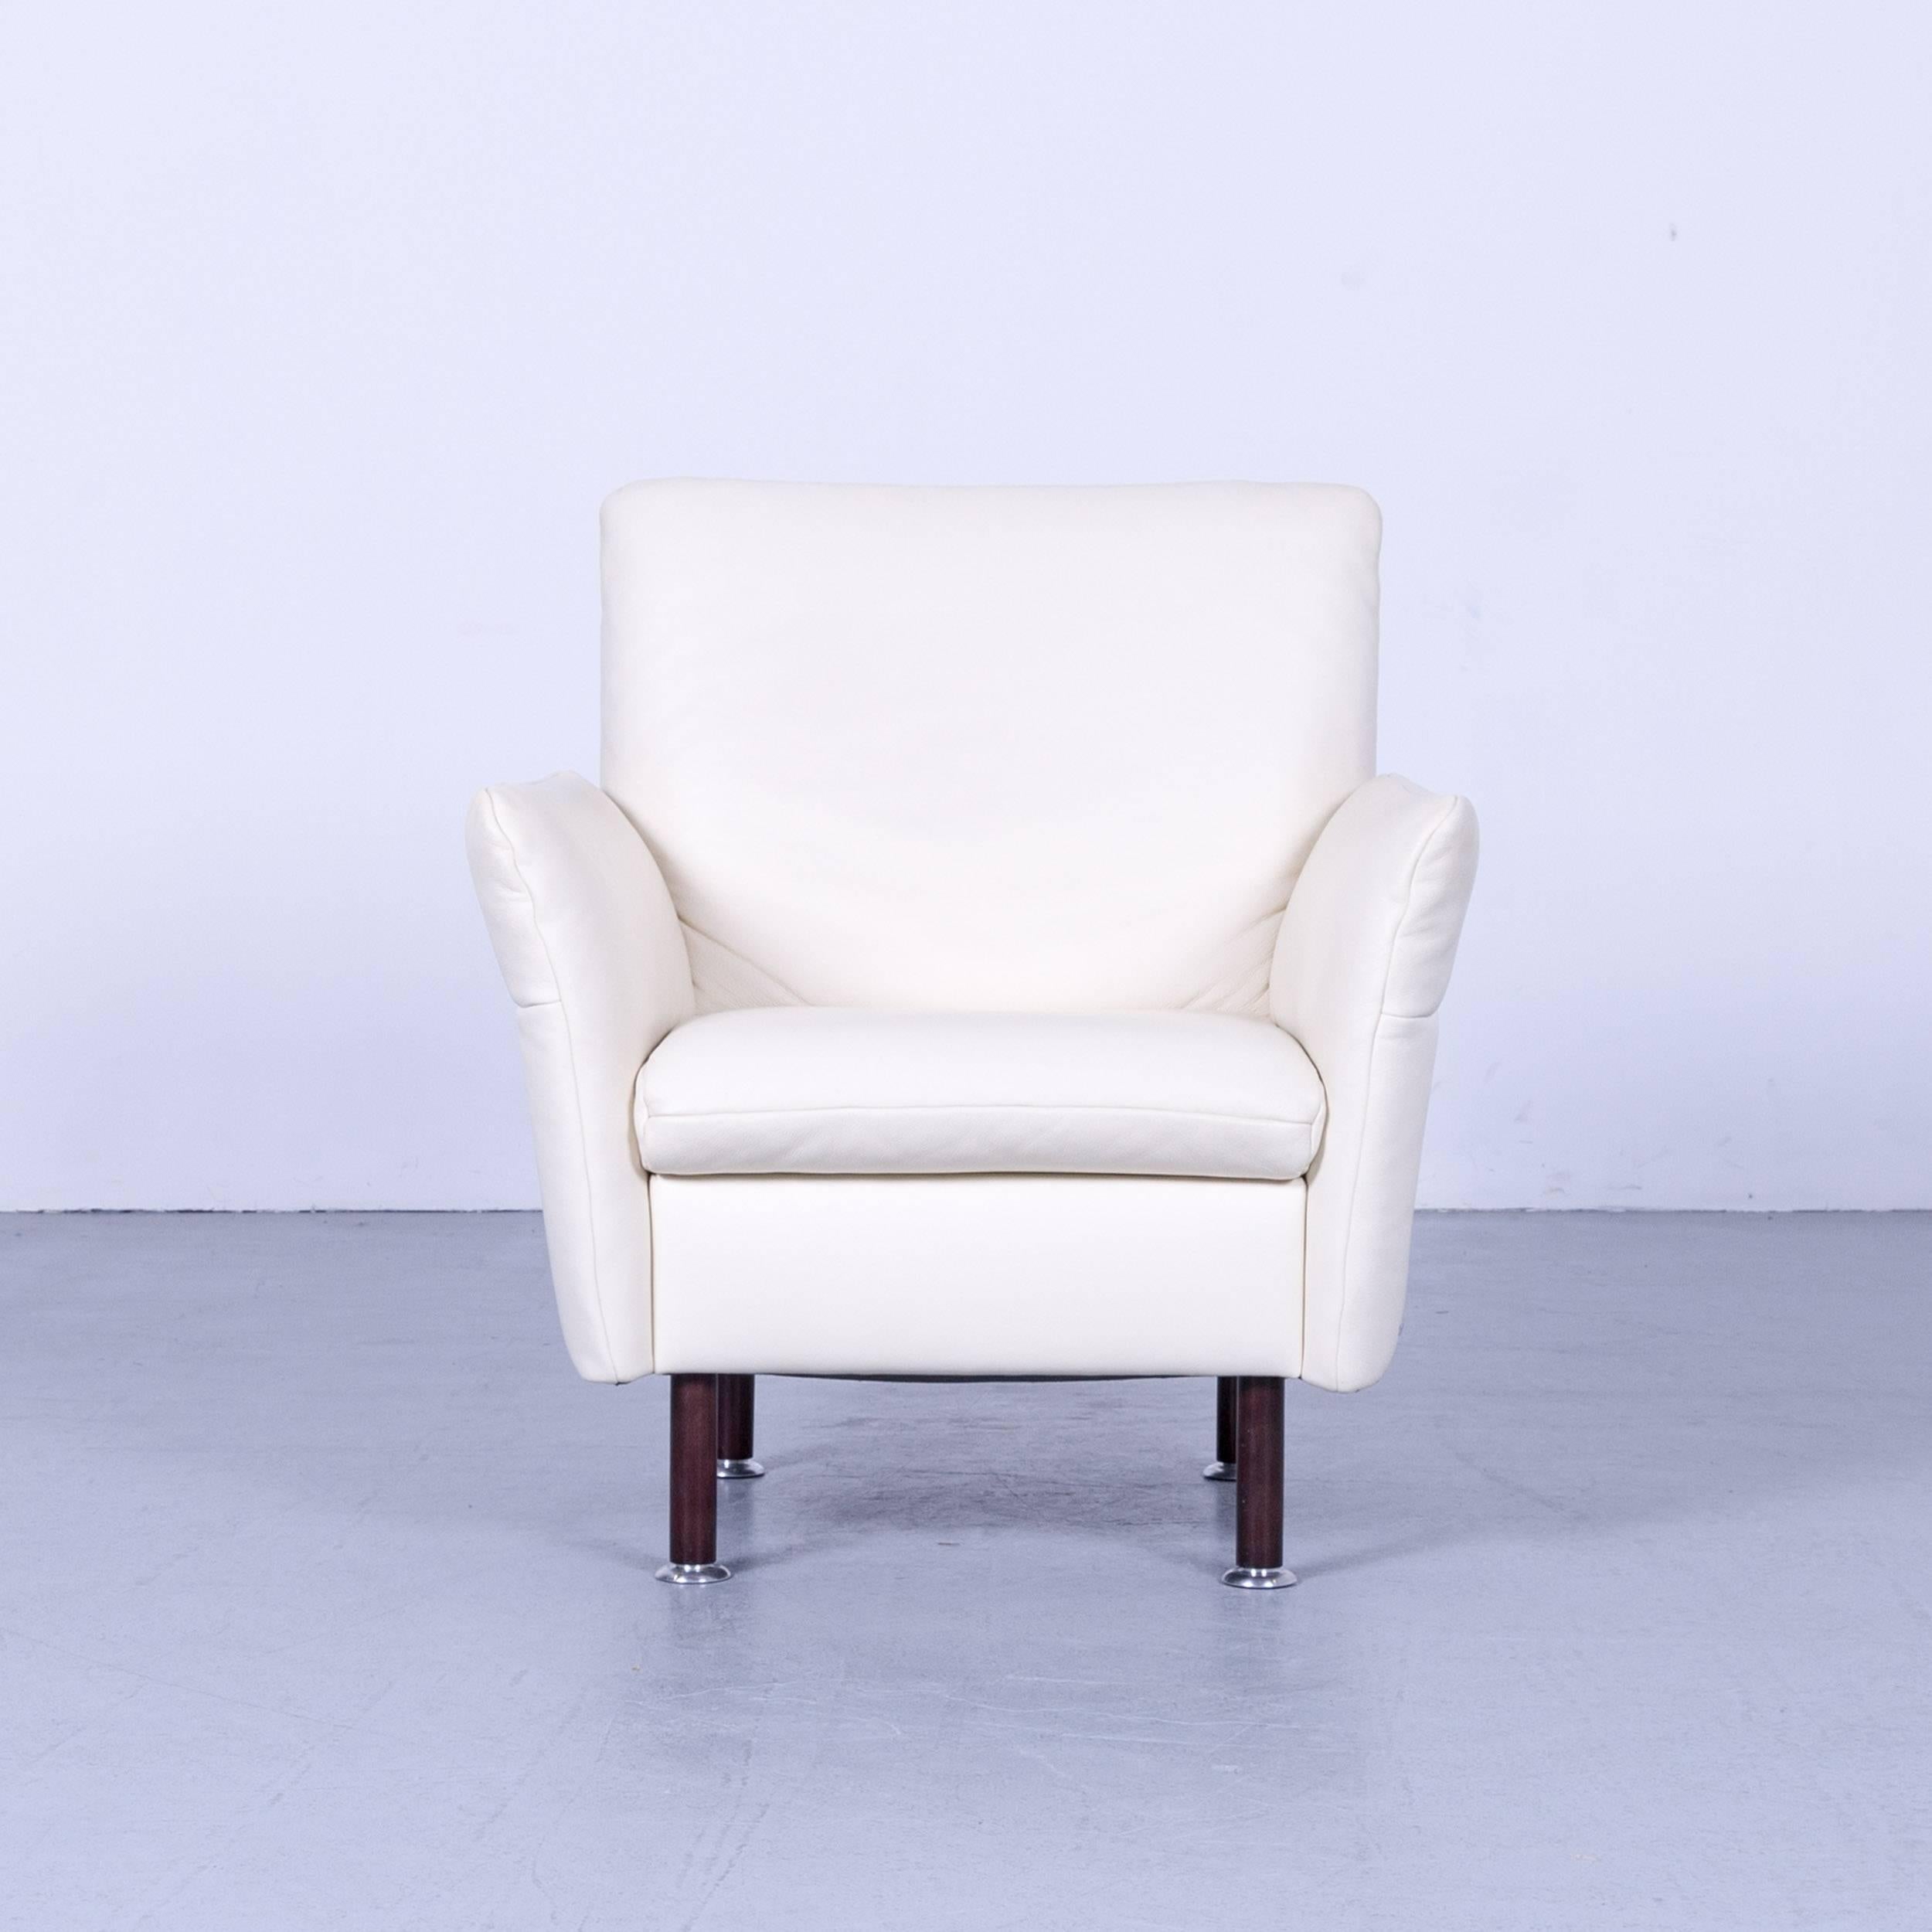 Koinor Vittoria designer leather armchair in crème white with functions, made for pure comfort and style.